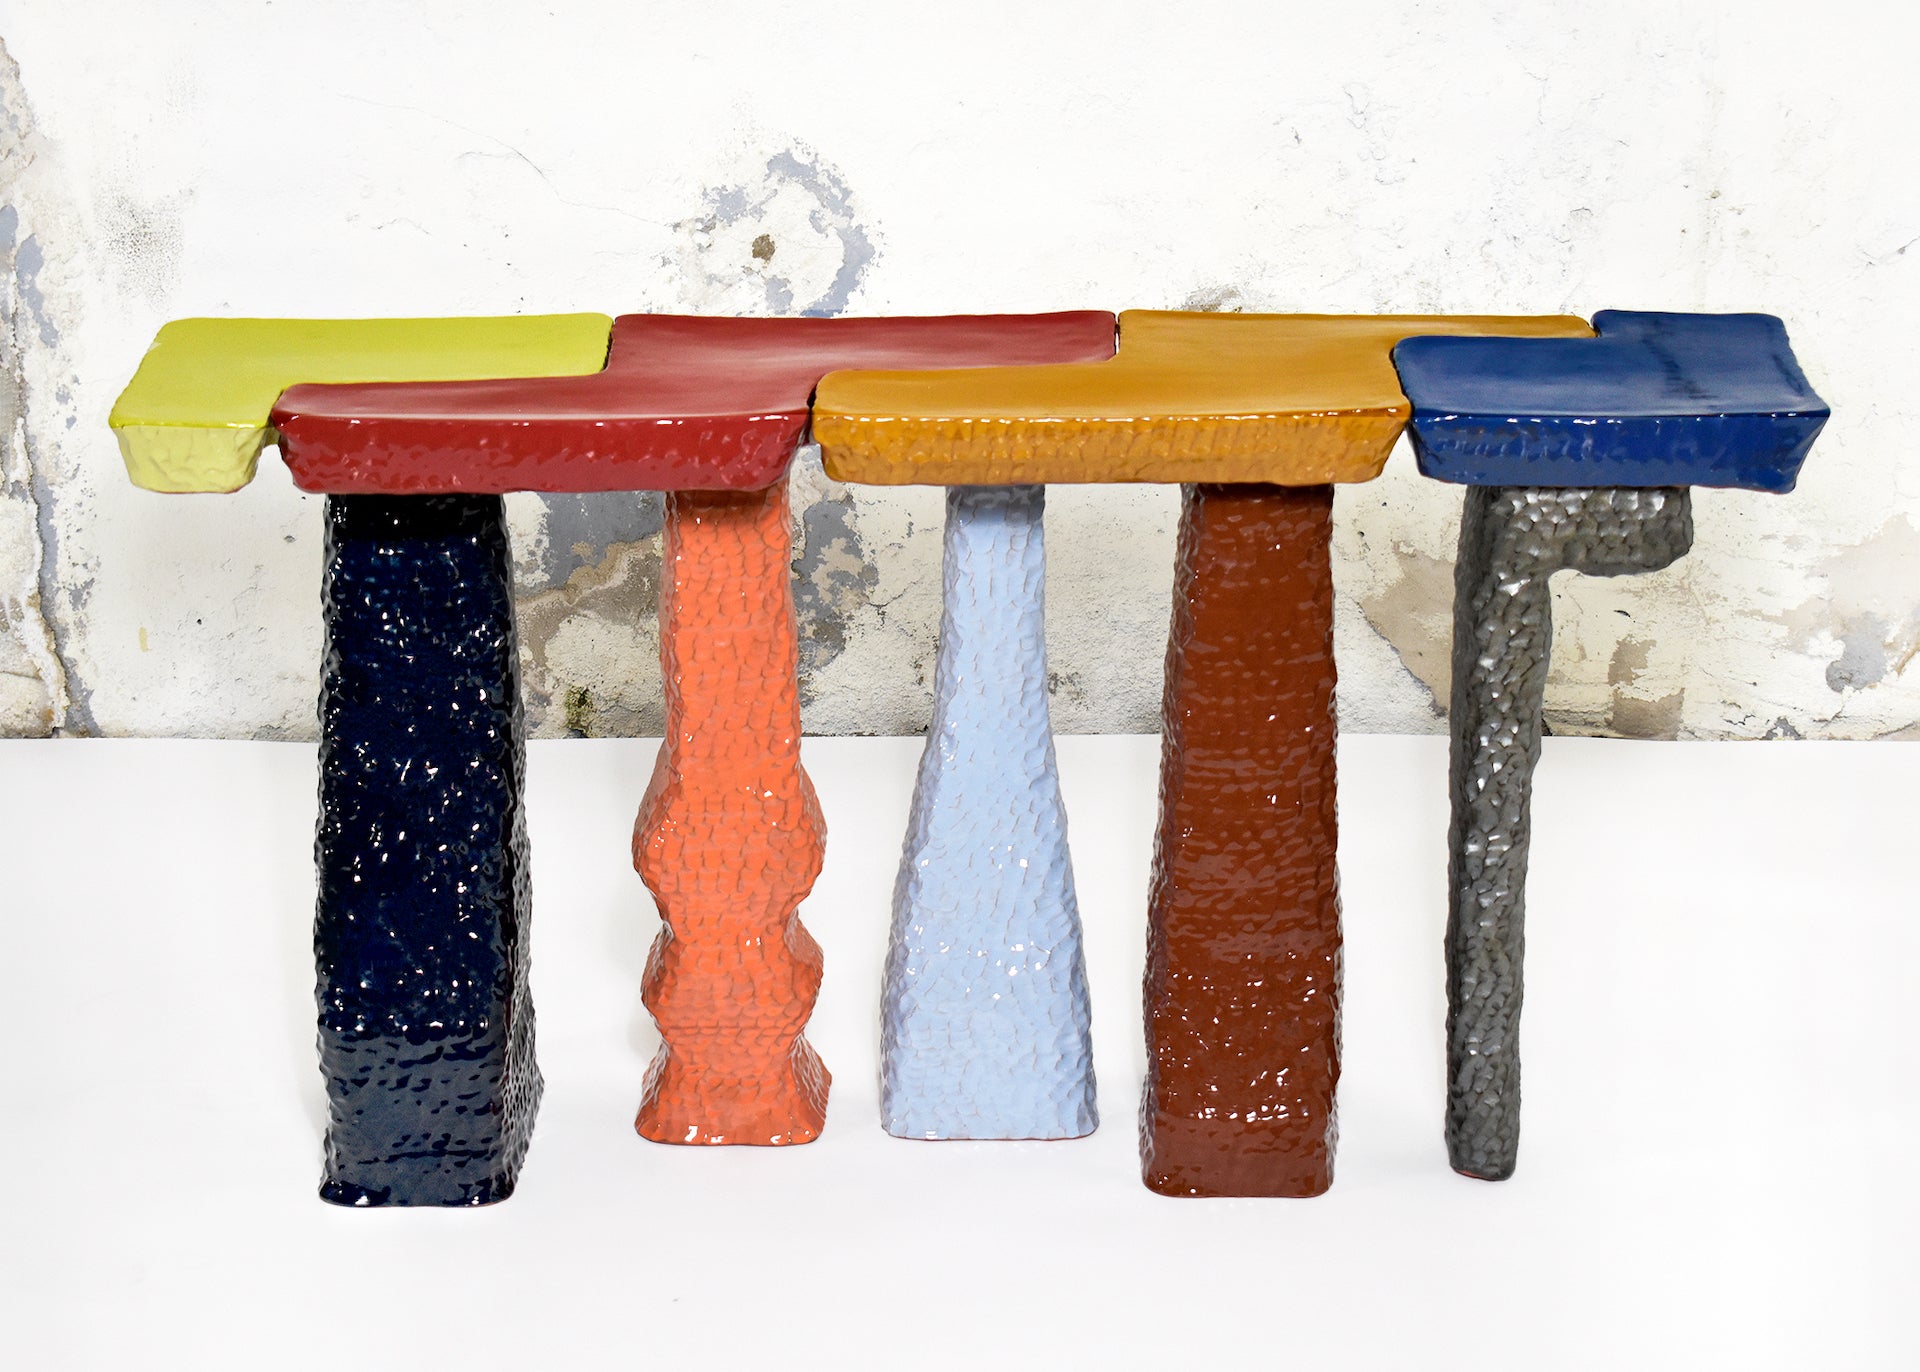 Console Table by Sean Gerstley, 2021. Made of glazed ceramic and epoxy resin. Photo © Superhouse and Sean Gerstley